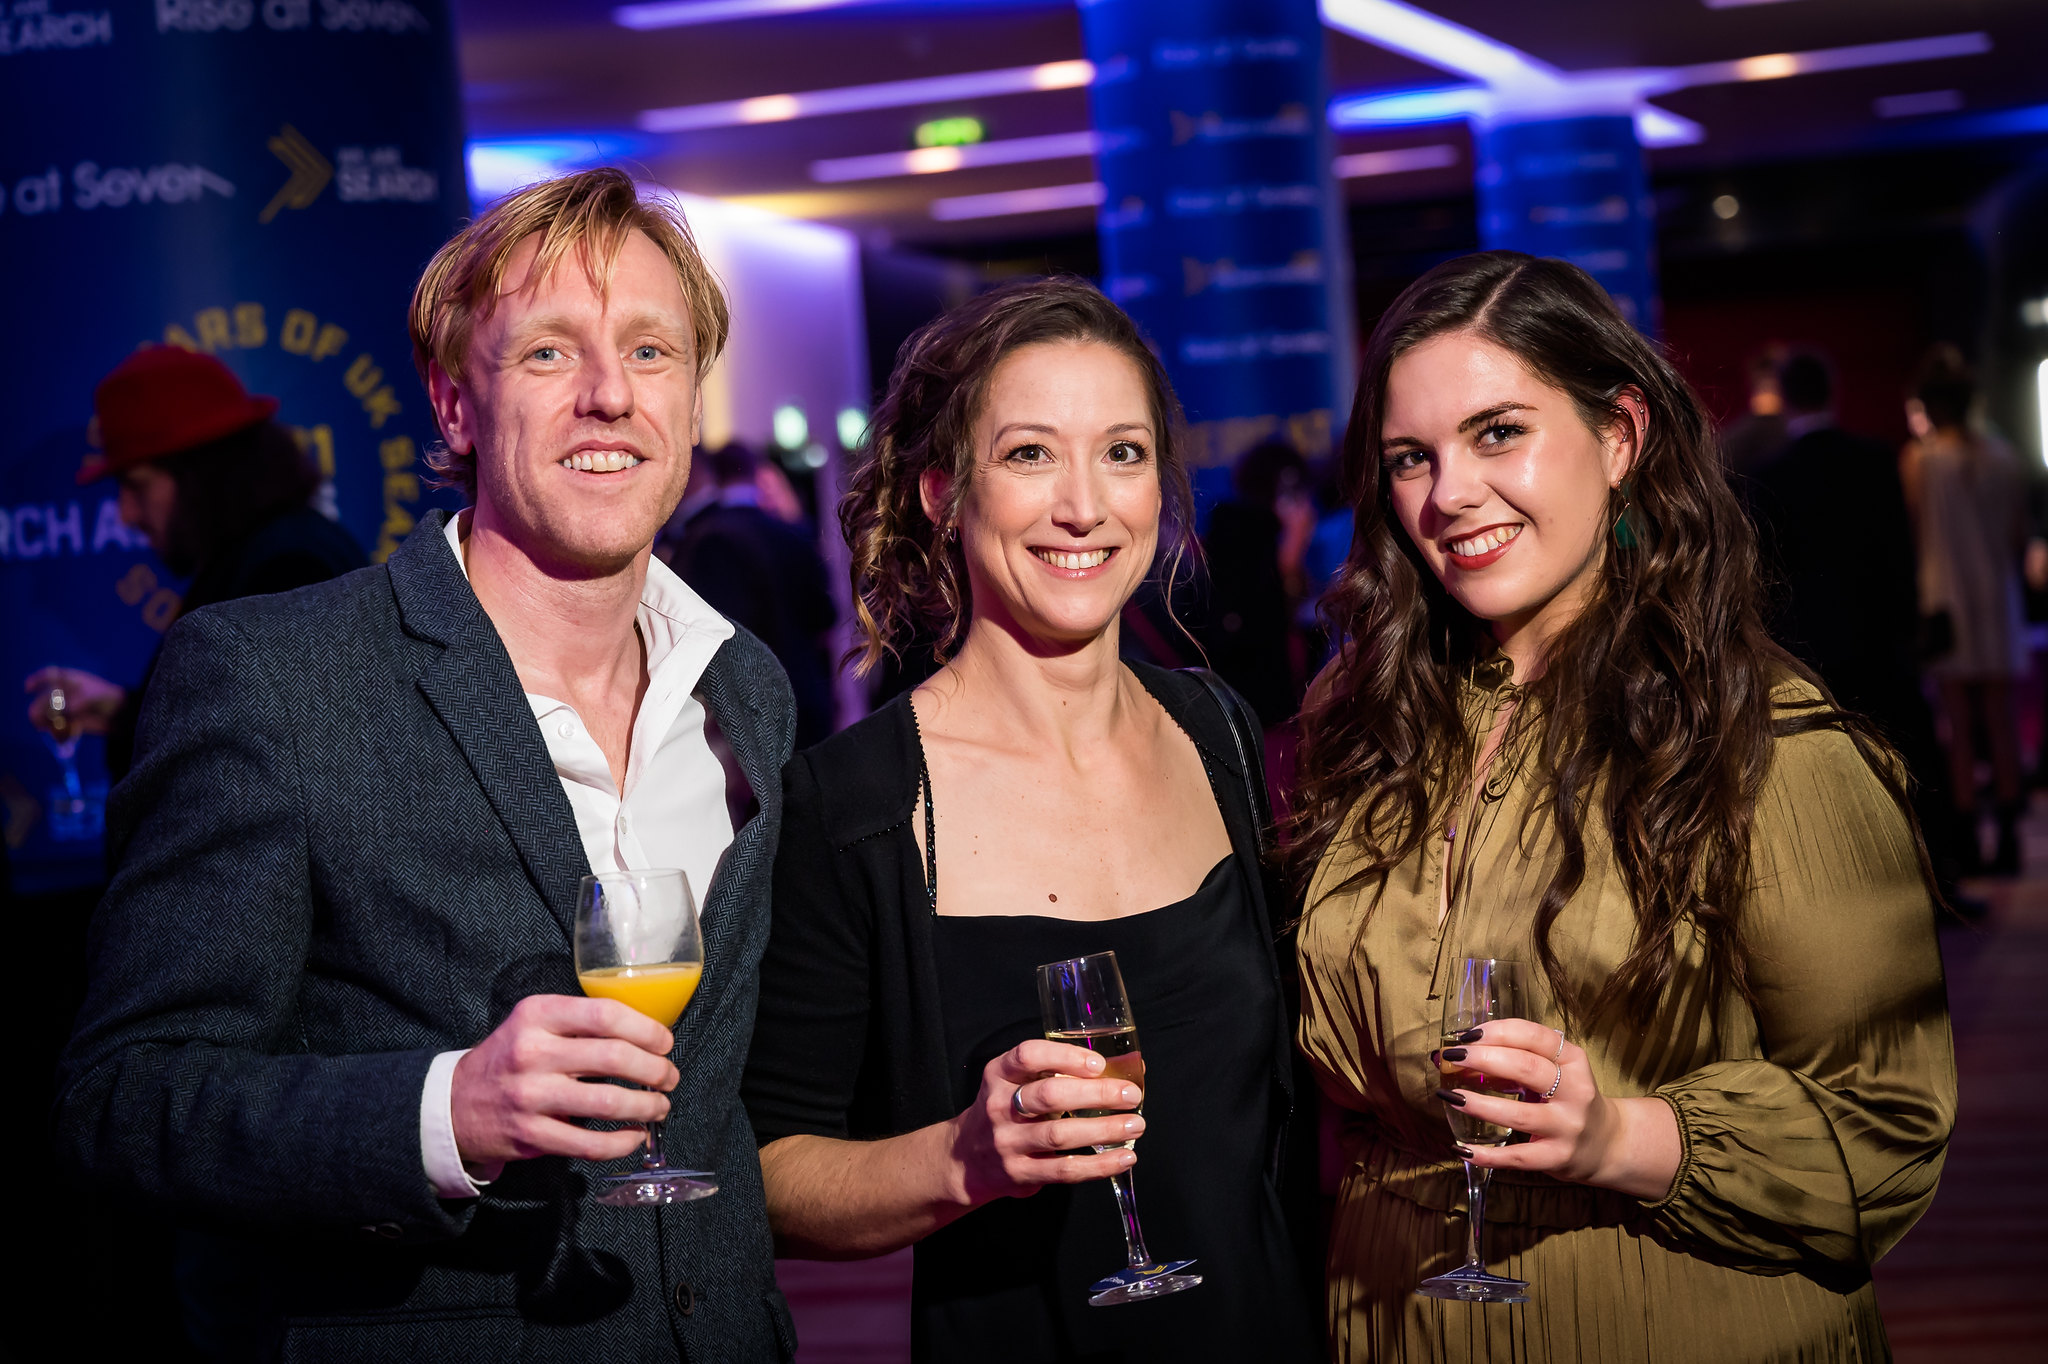 Image: Digital Agency D3 at the UK Search Awards